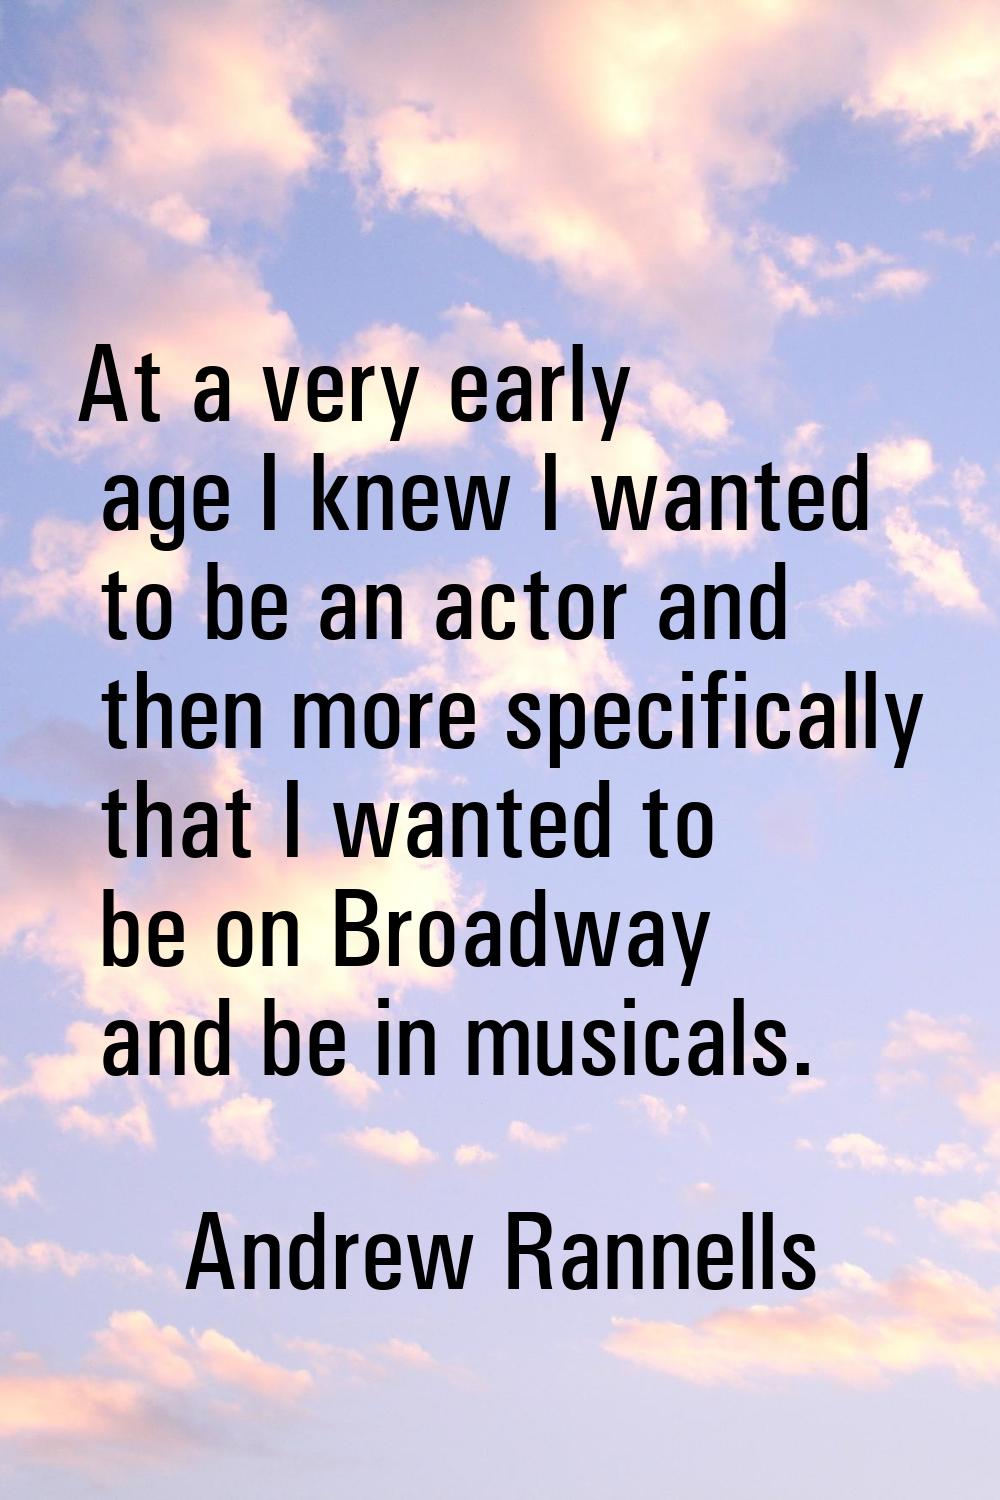 At a very early age I knew I wanted to be an actor and then more specifically that I wanted to be o